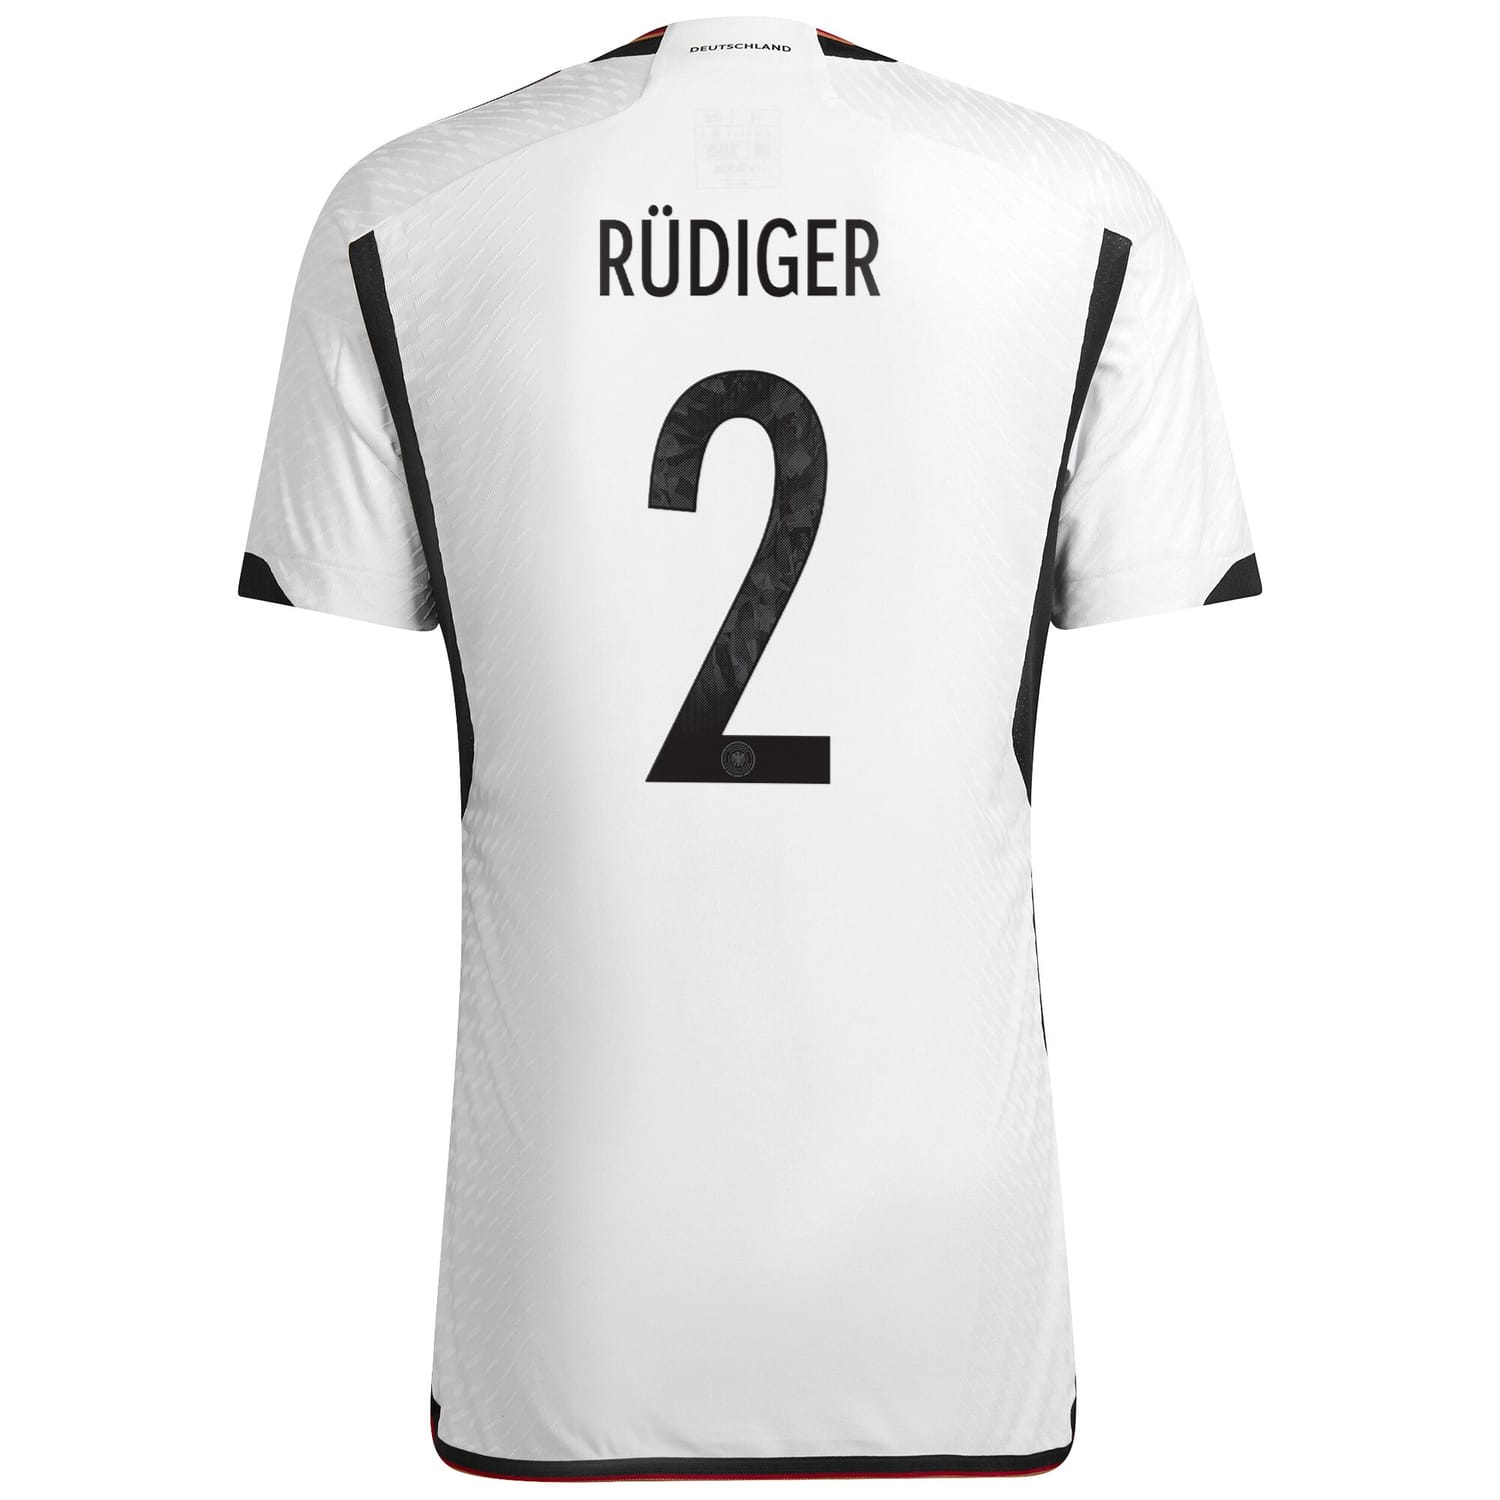 Germany National Team Home Authentic Jersey Shirt White 2022-23 player Antonio Rüdiger printing for Men